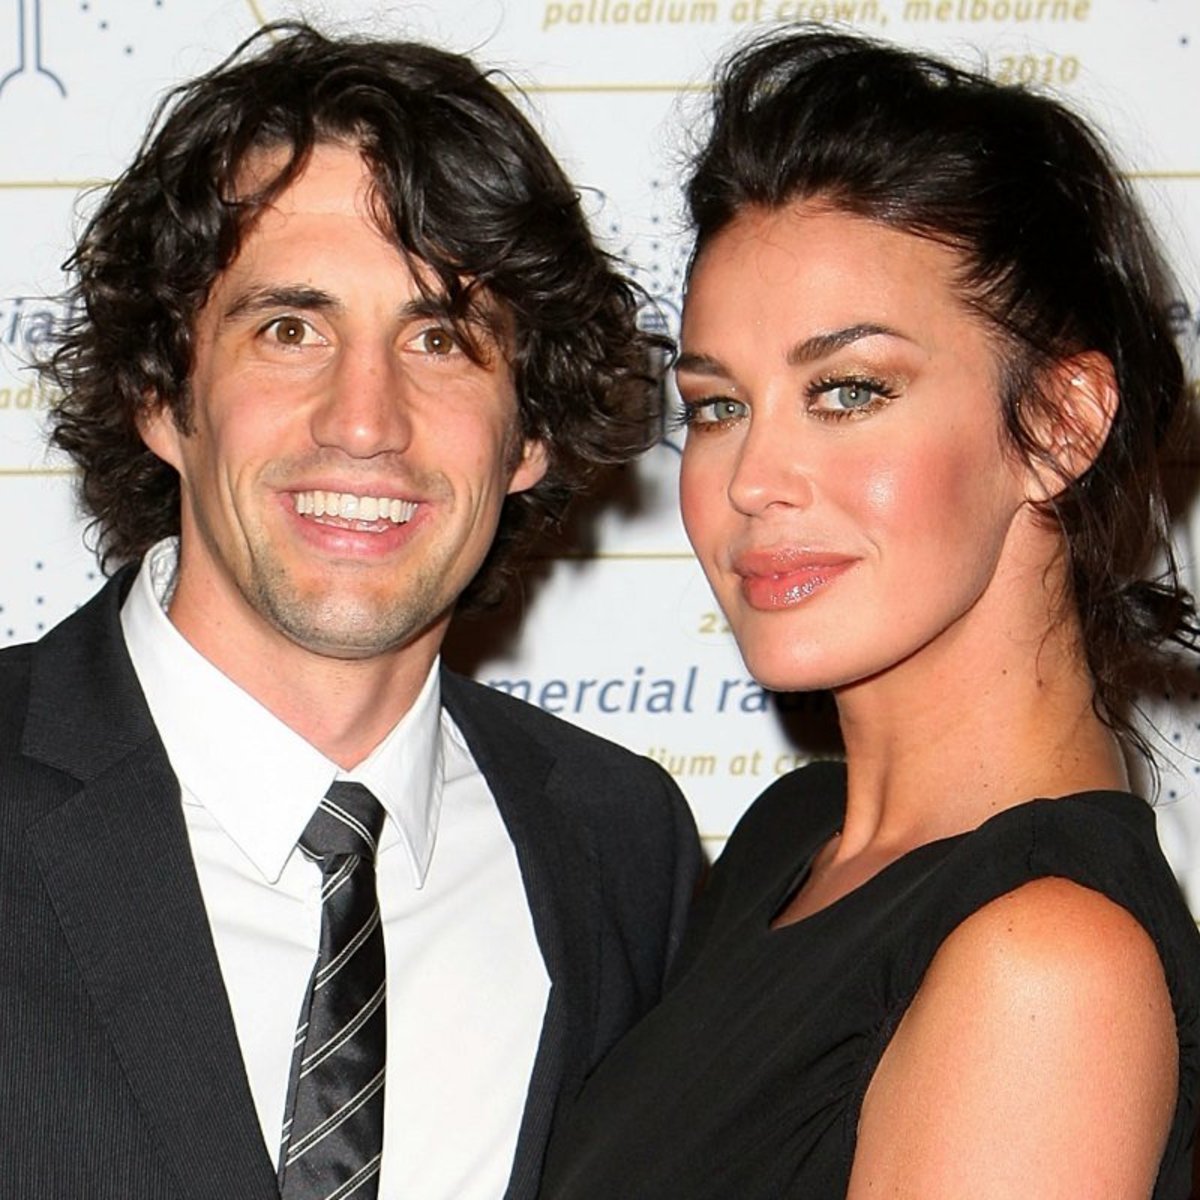 Megan Gale on her split with Andy Lee and being called a cougar.